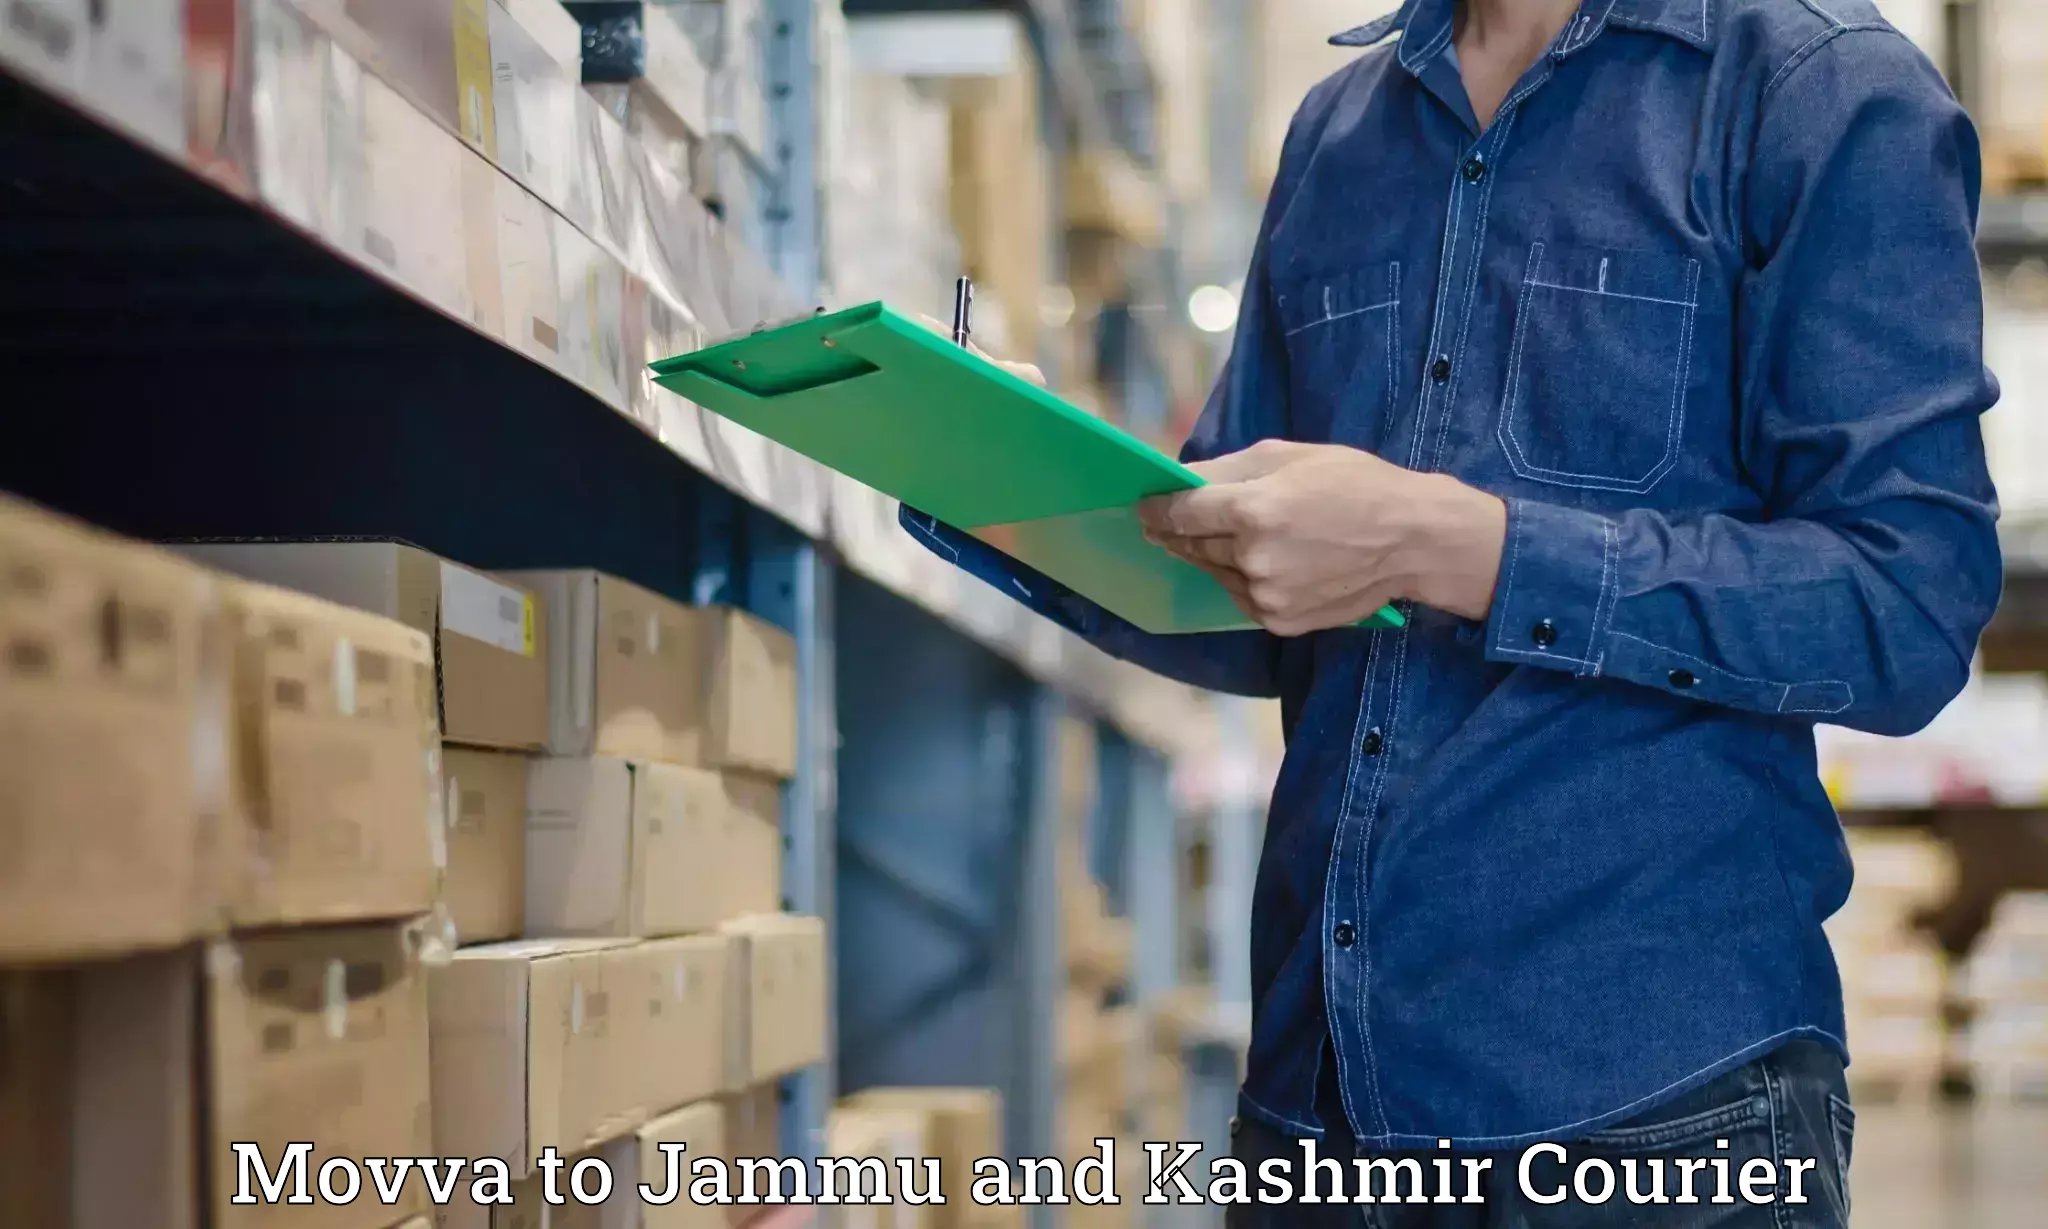 Medical delivery services Movva to Jammu and Kashmir